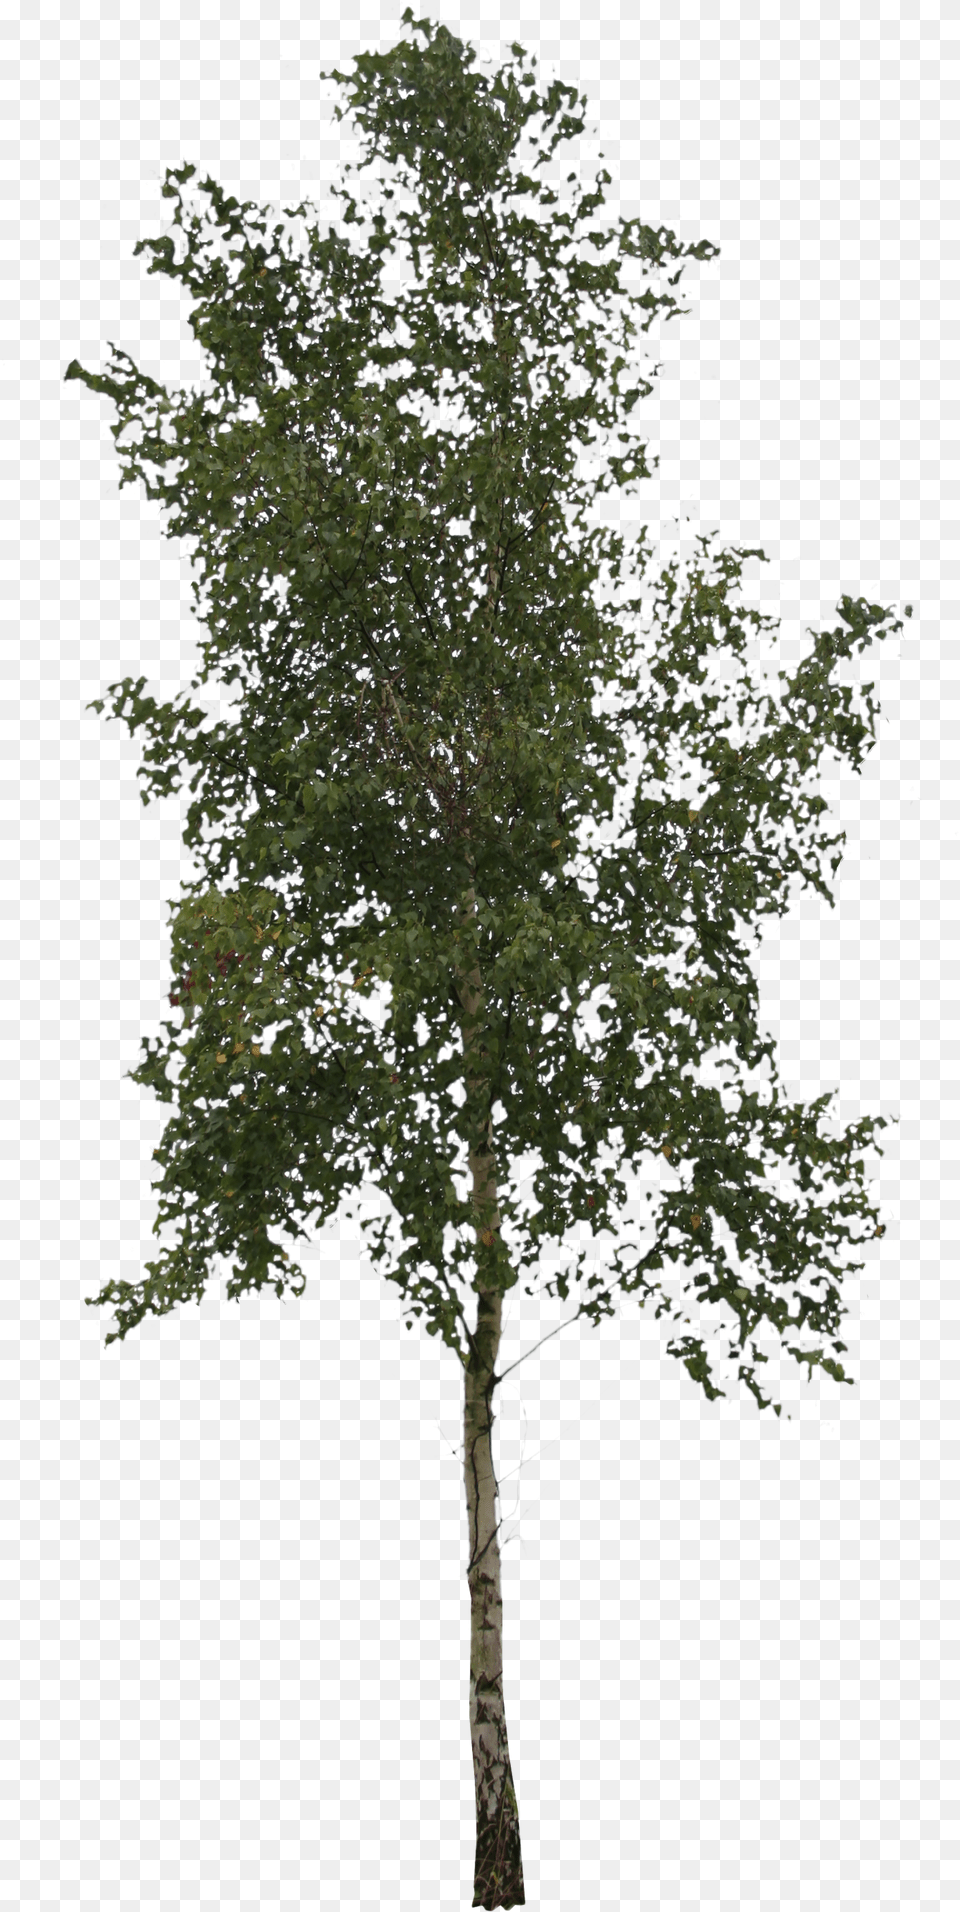 Cut Out Tree Birch People Trees And Leaves, Plant, Tree Trunk, Oak, Sycamore Free Transparent Png